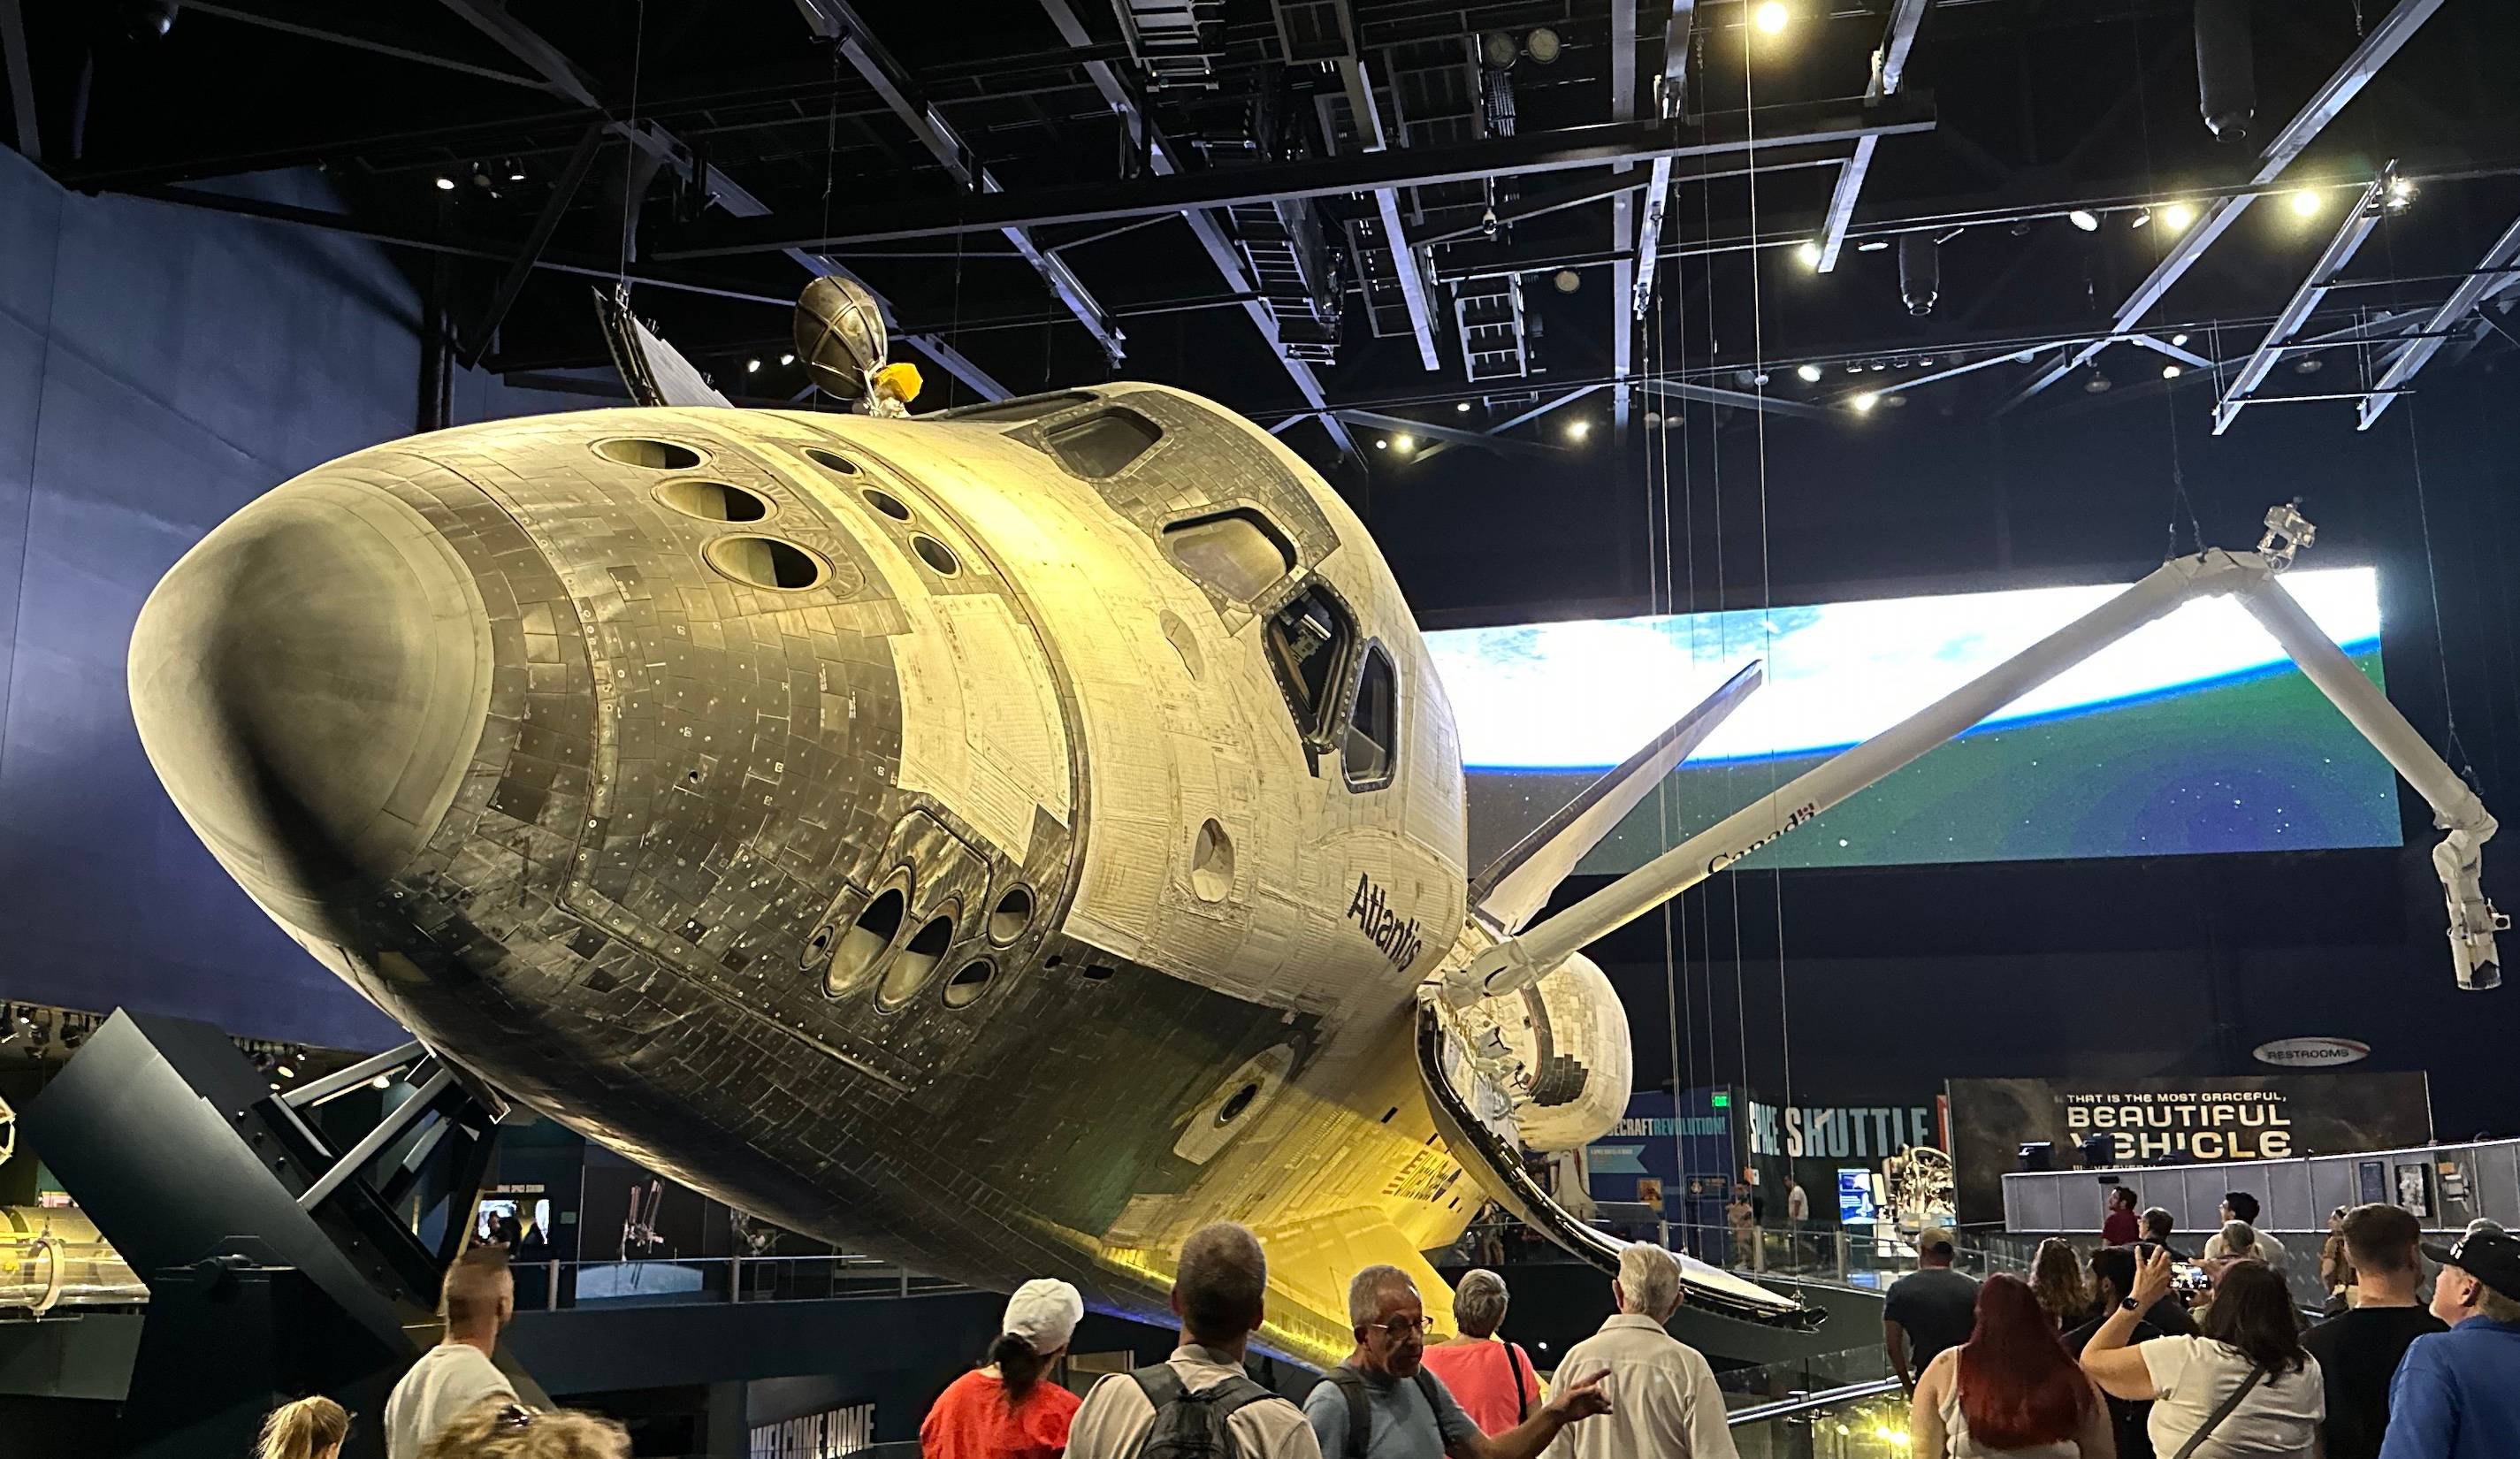 Celebrate 10 years of Space Shuttle Atlantis at Kennedy Space Center Visitor Complex